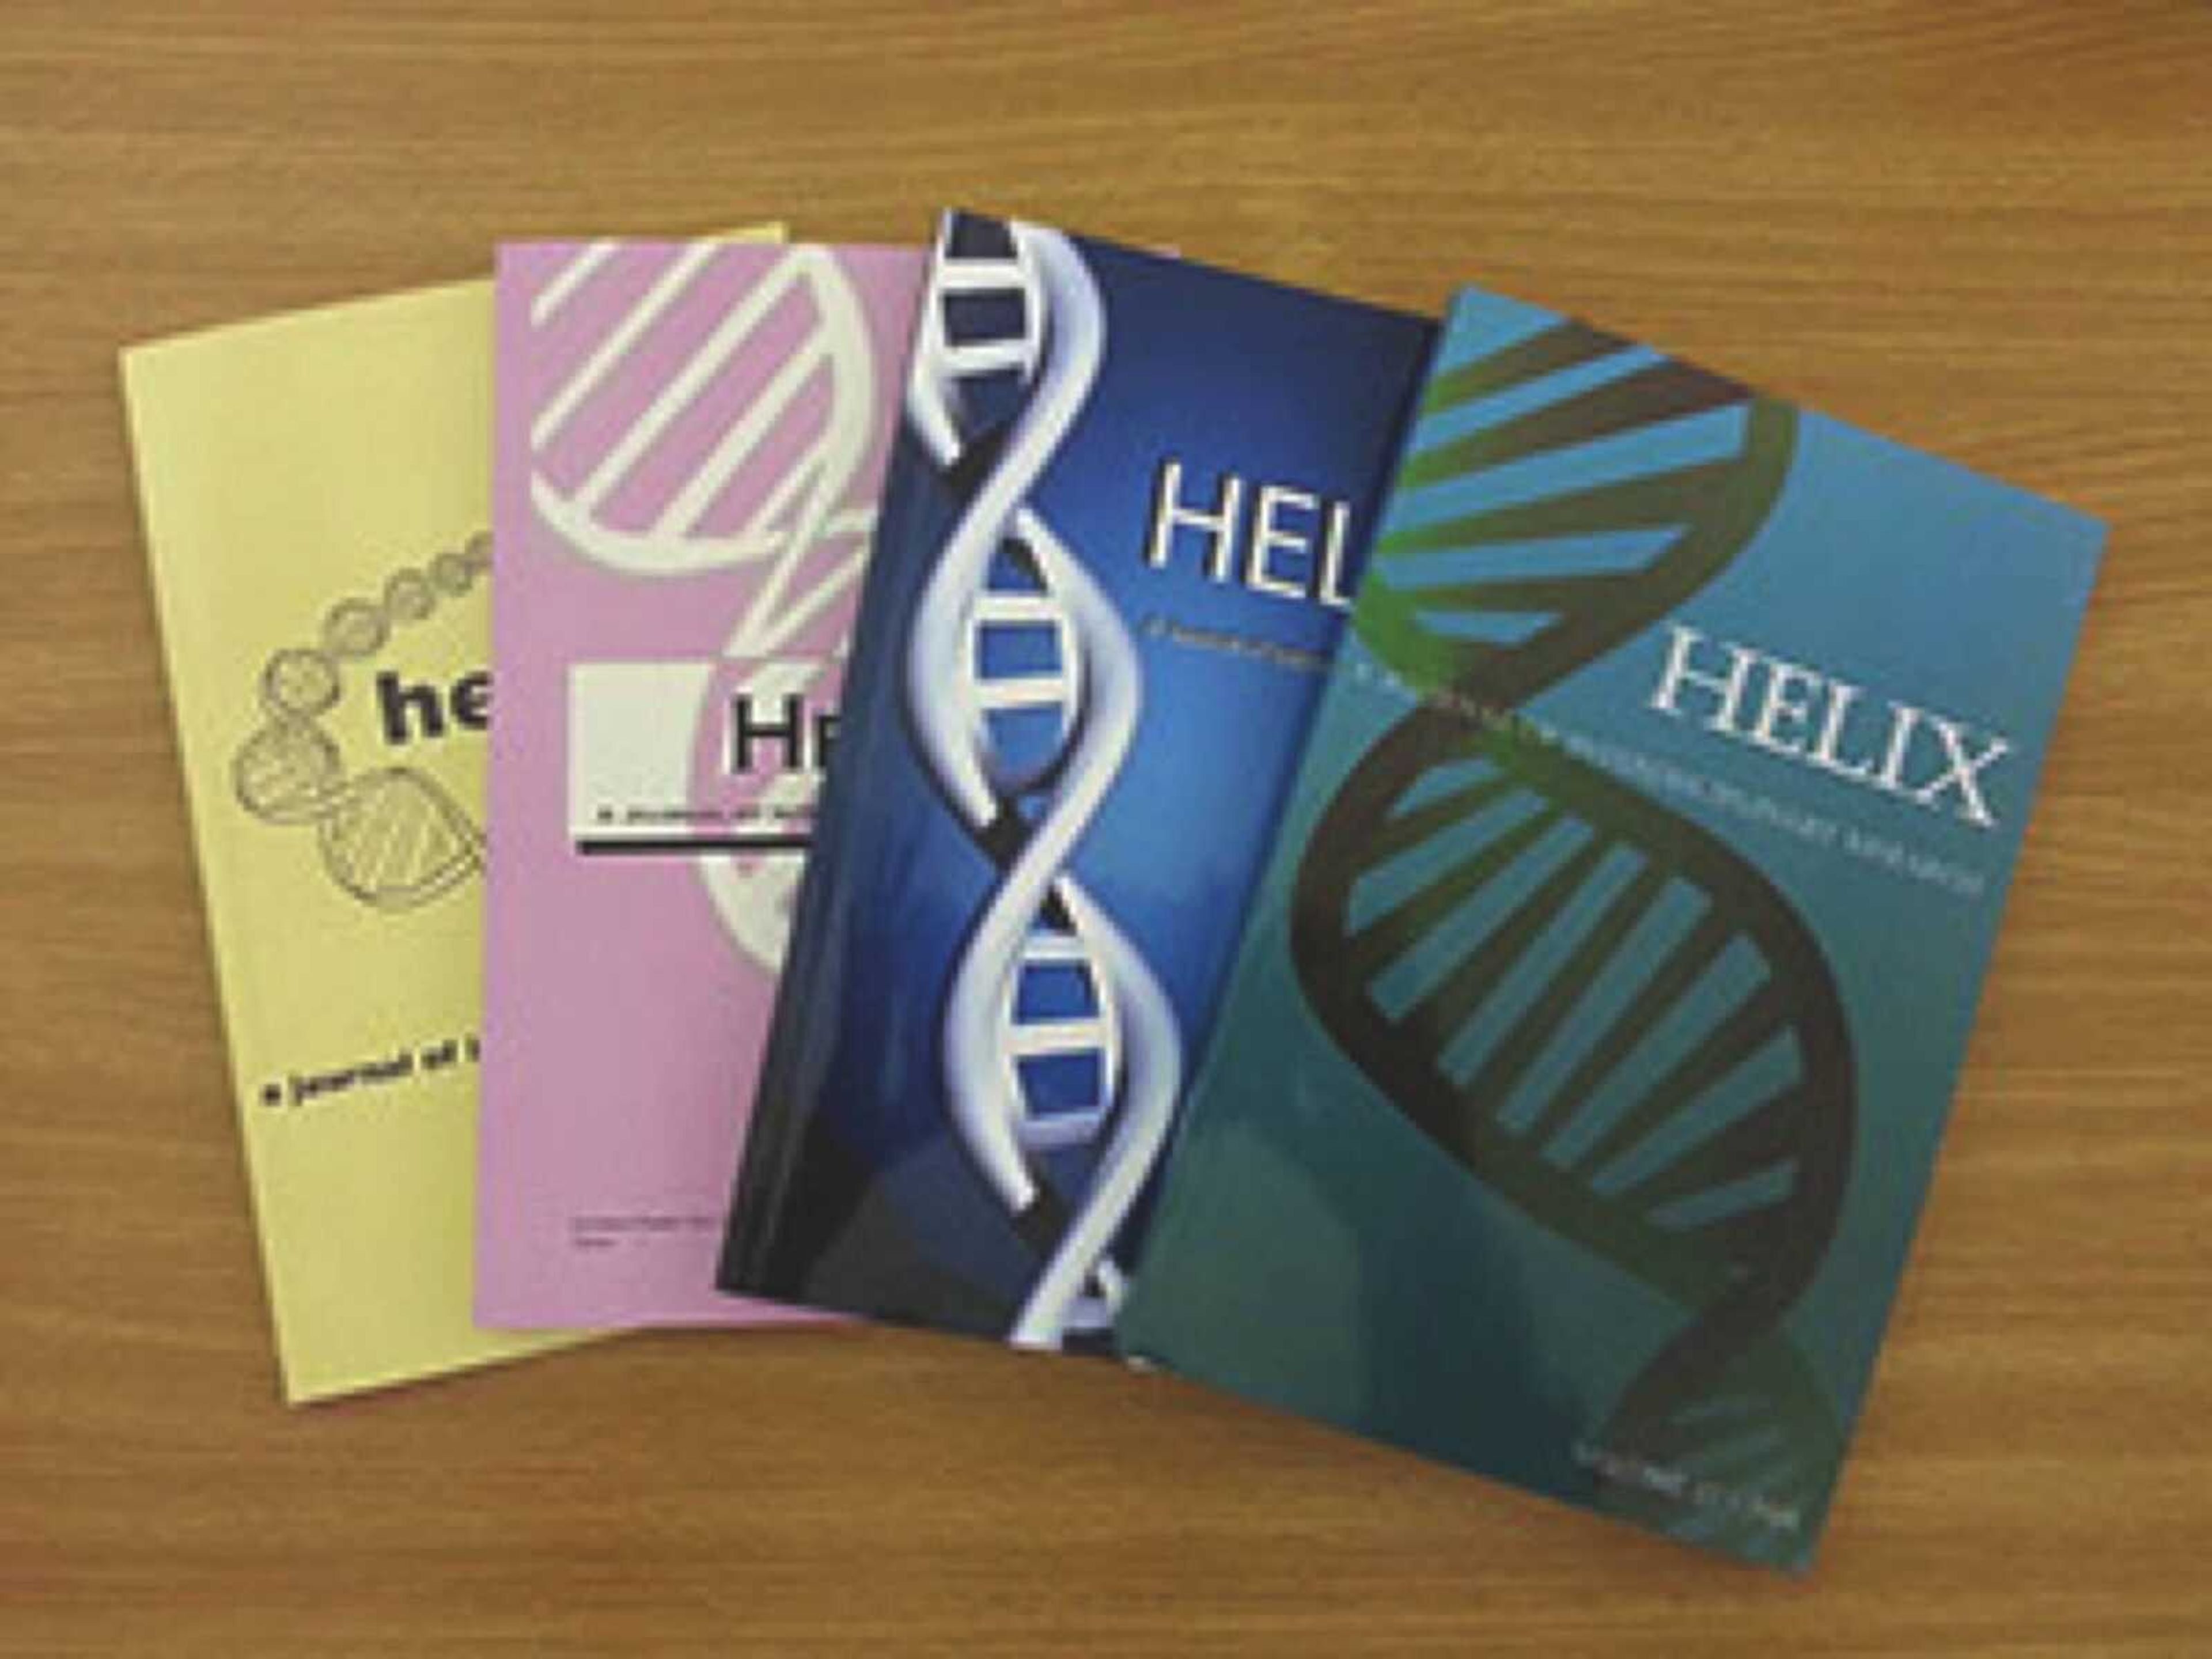 Helix journal open for student research submissions